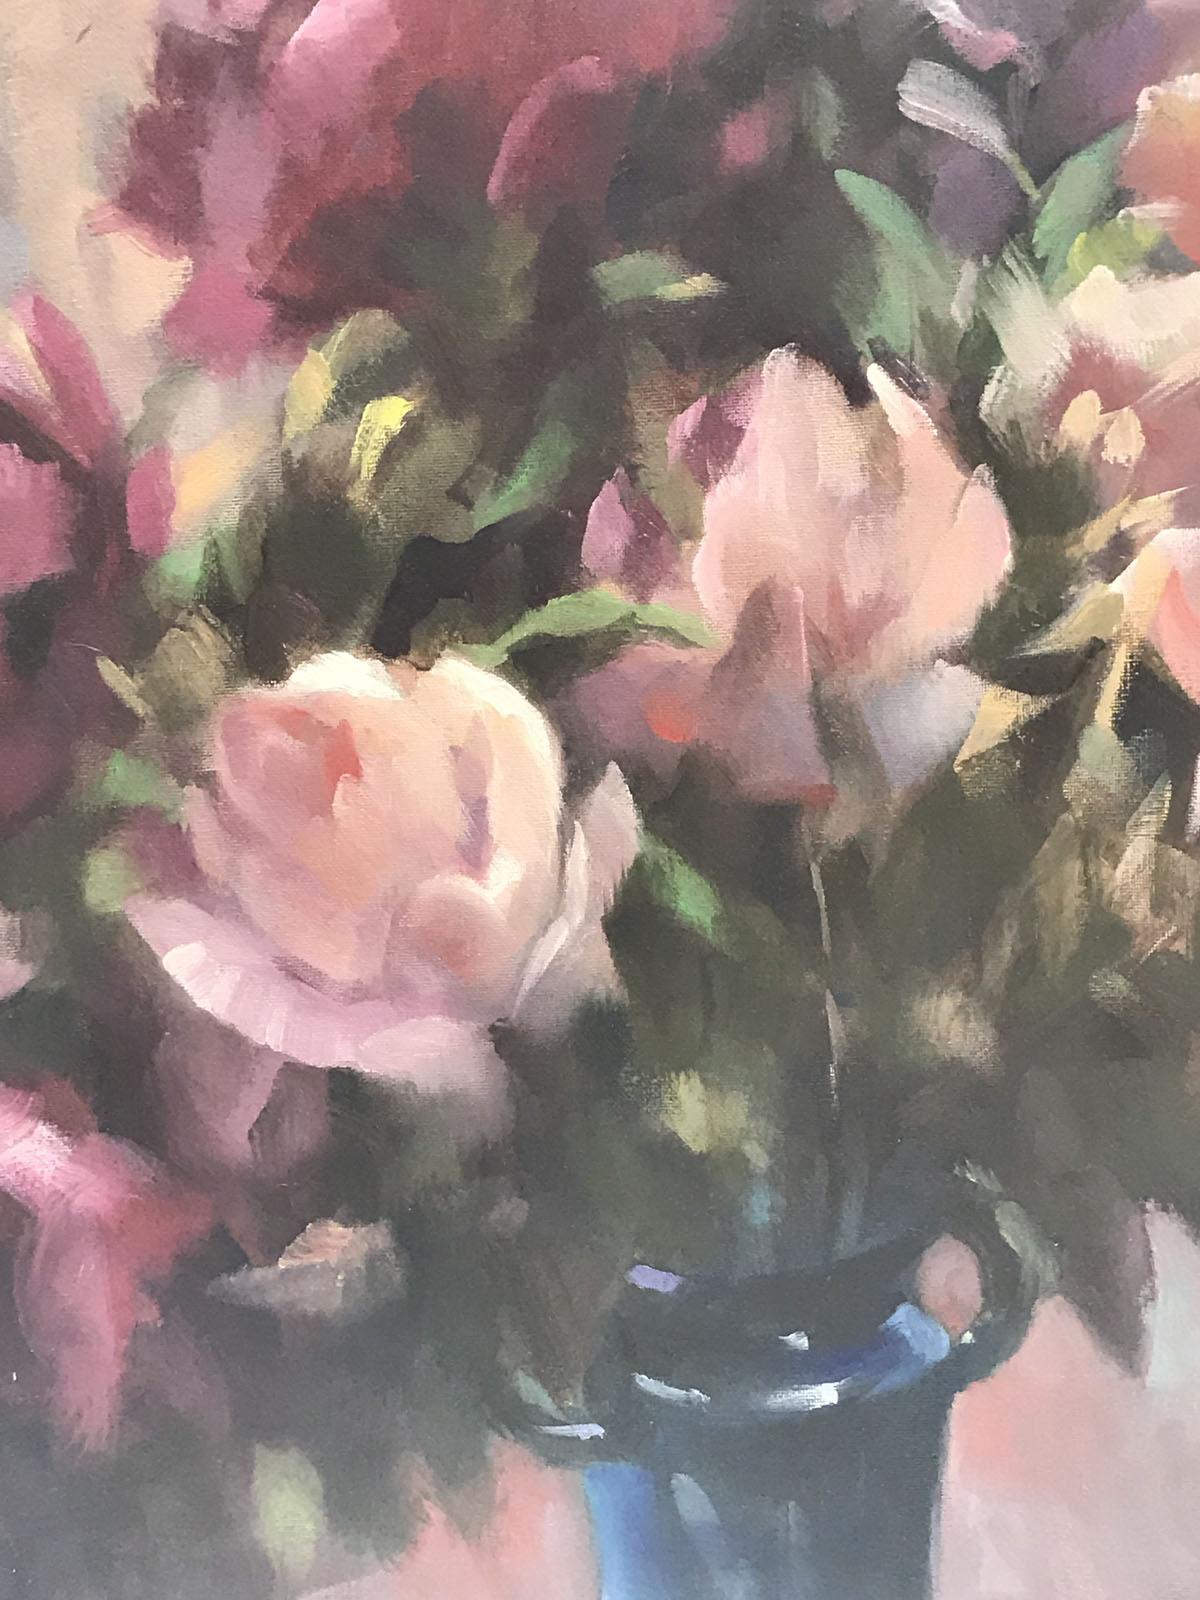 Trevor Waugh
Rose Light
Original Oil Painting
Oil Paint on Board
Size: H 50cm x W 75.5cm
Signed and titled
Please note that in situ images are purely an indication of how a piece may look.

Rose Light is an original contemporary oil